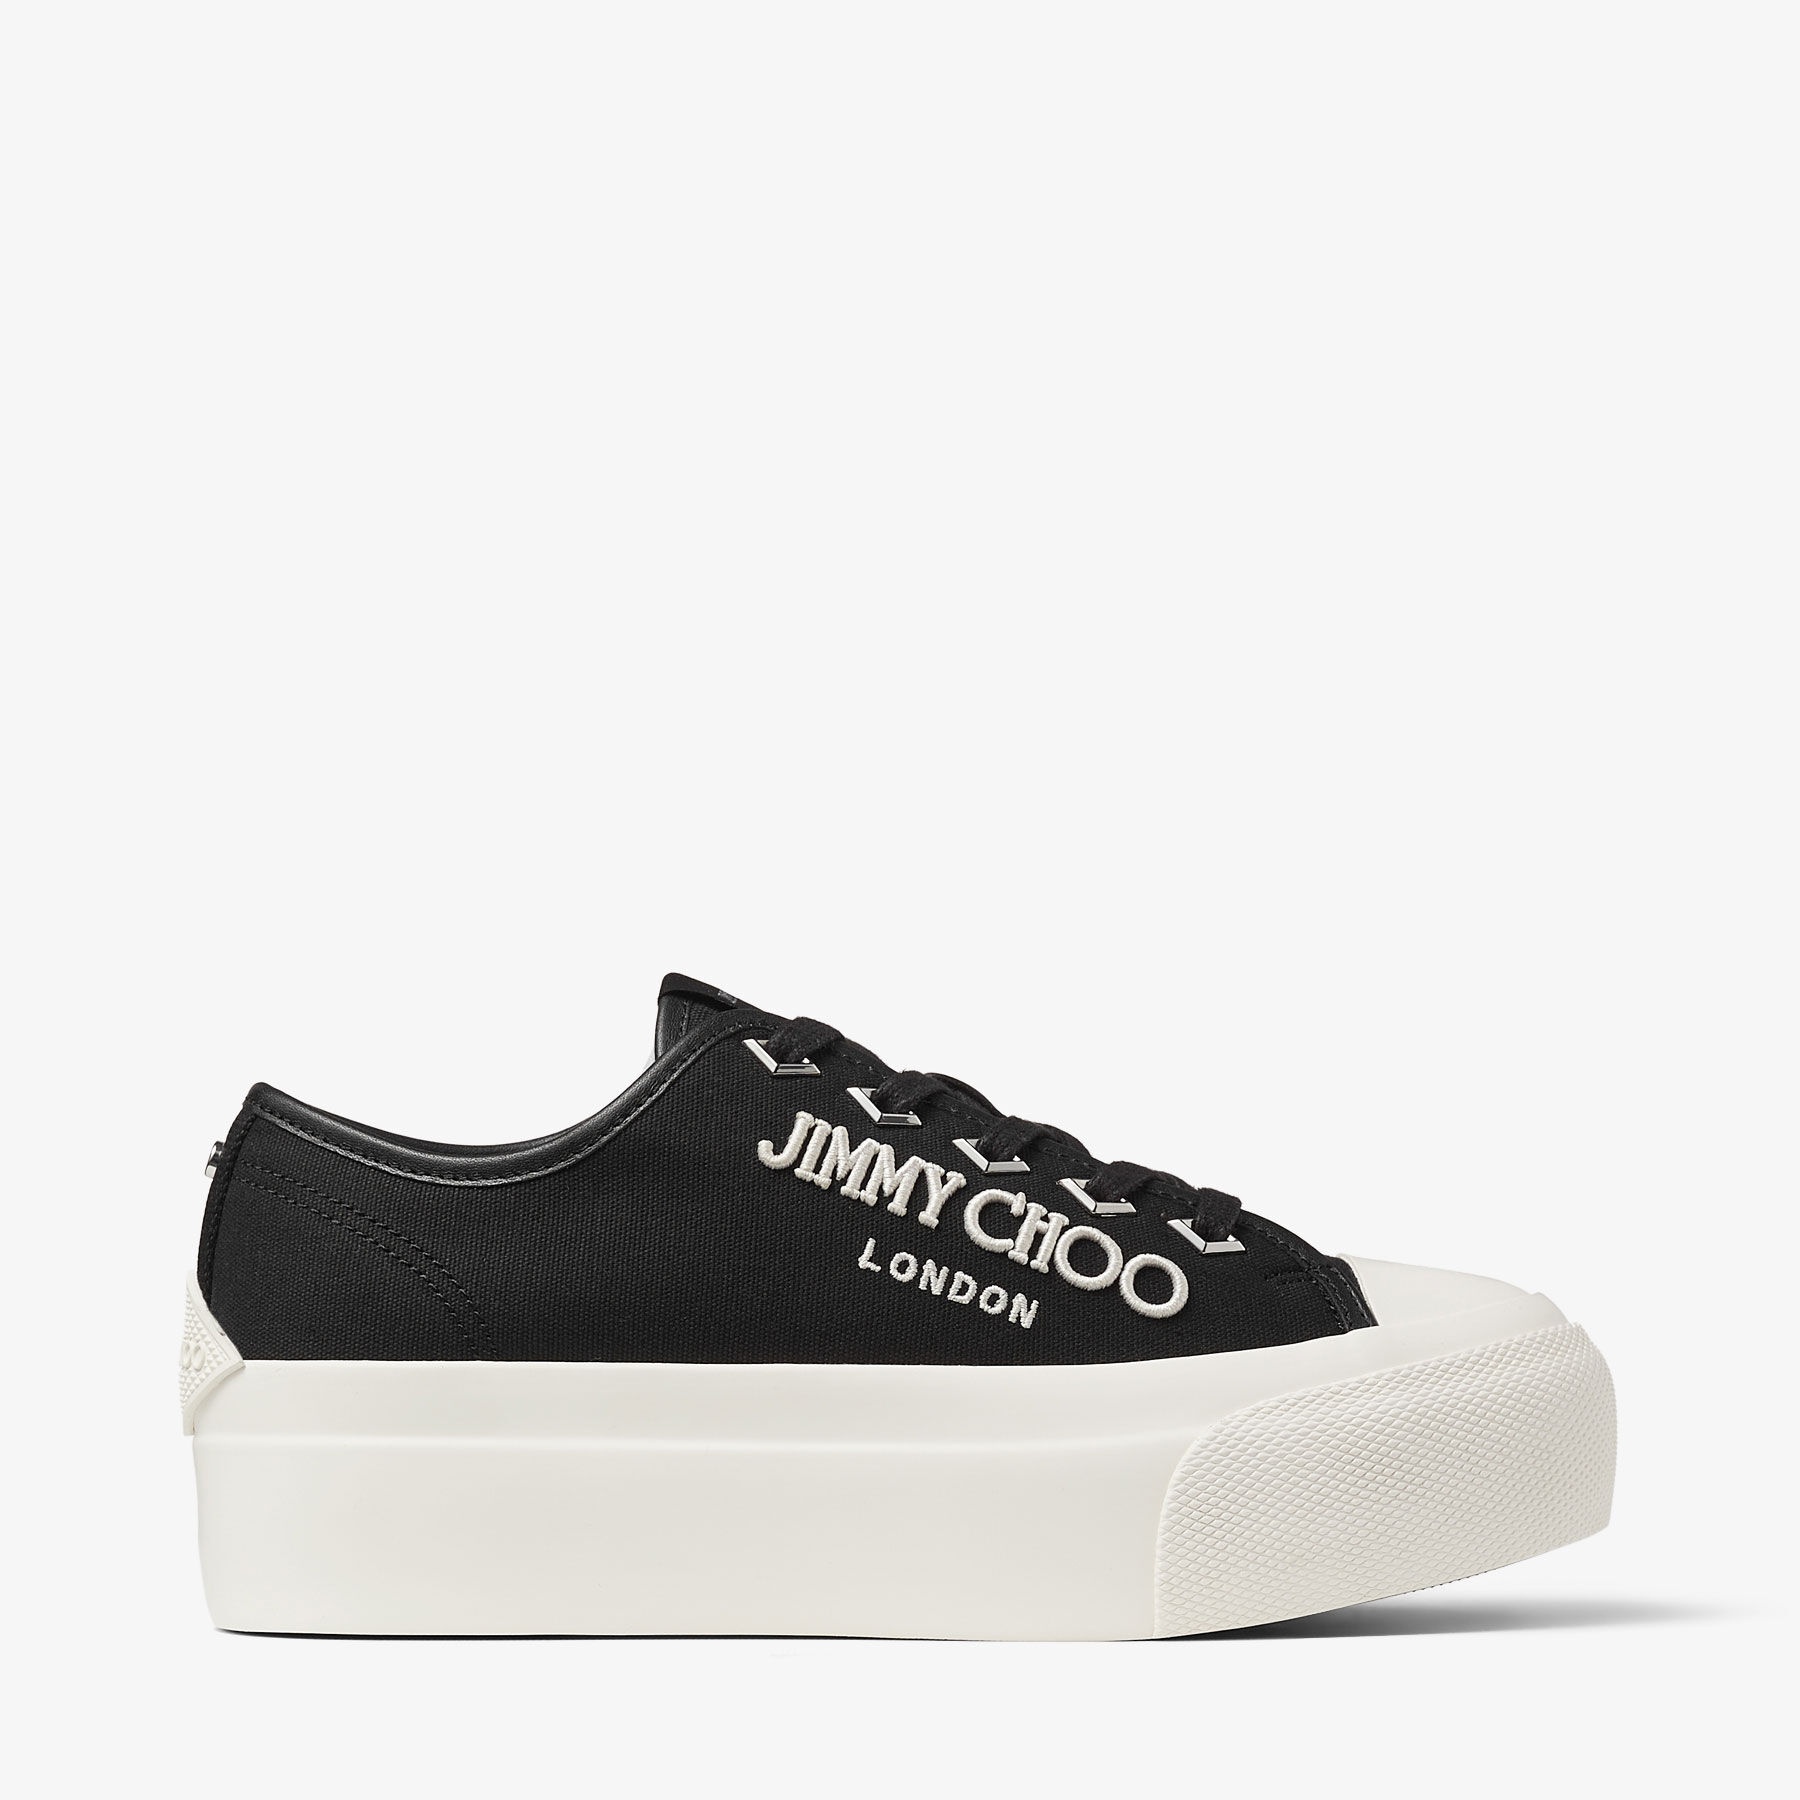 Palma Maxi/F
Black and Latte Canvas Platform Trainers with Embroidered Logo - 1